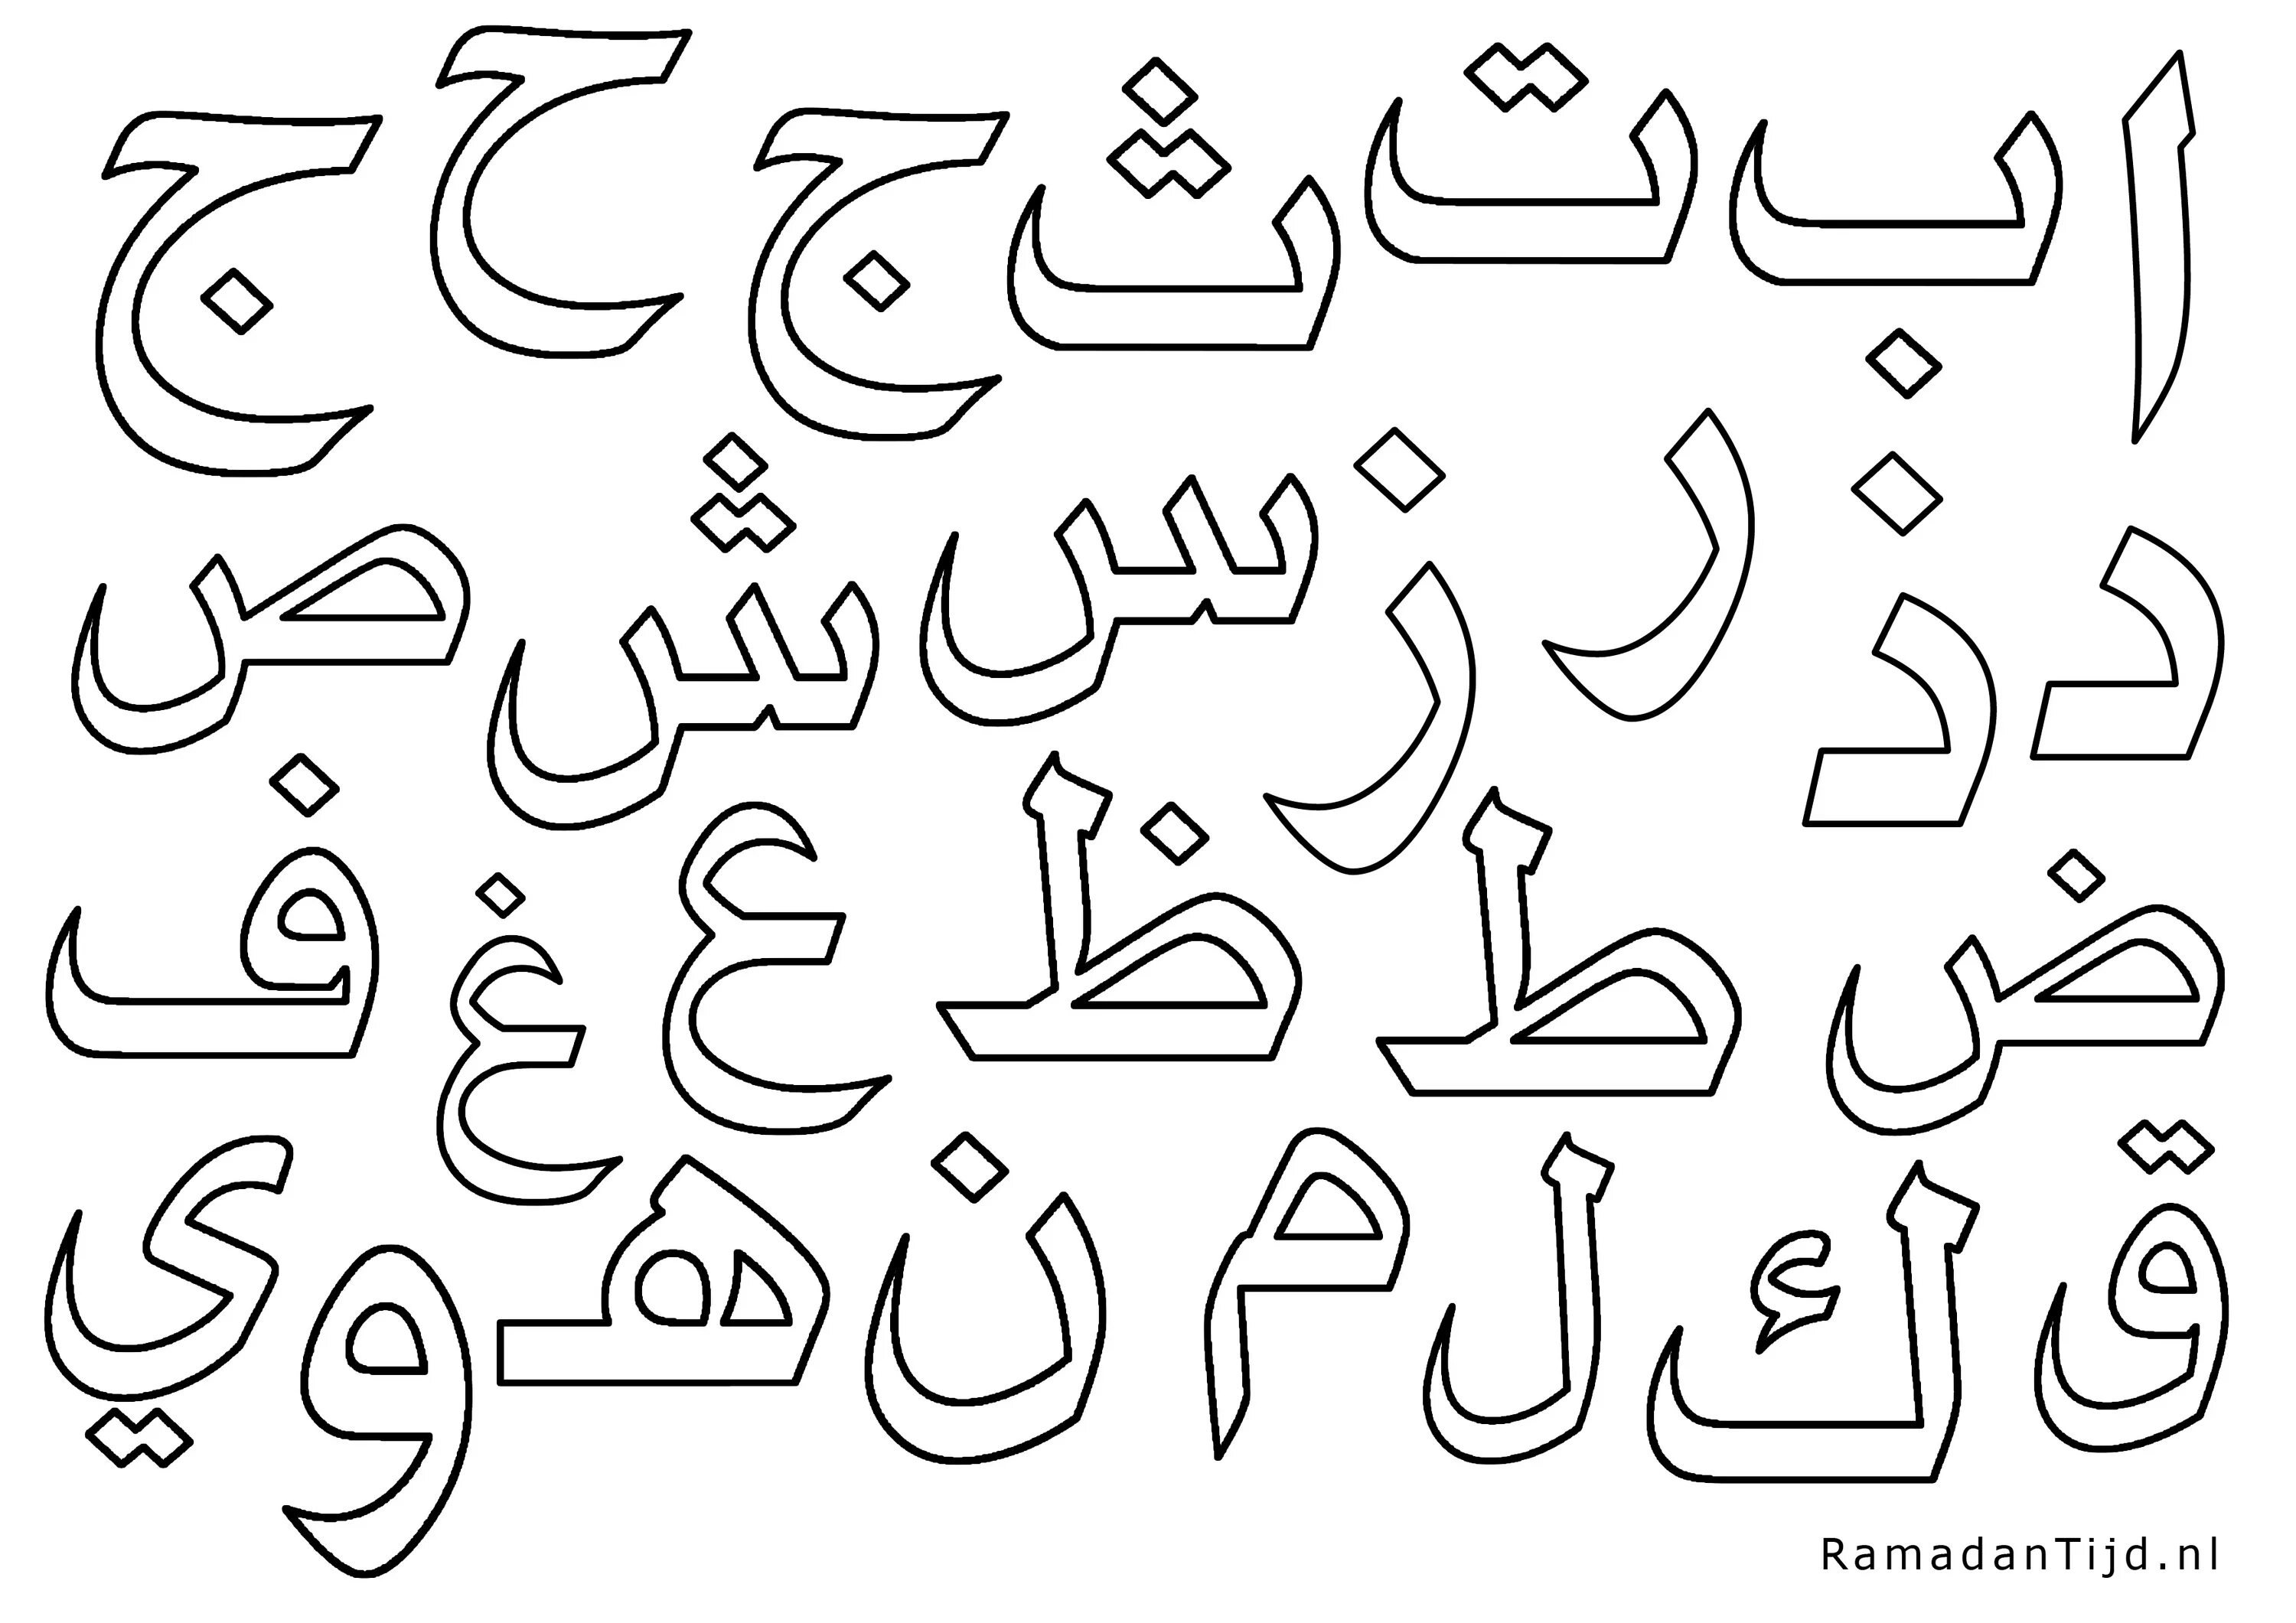 Arabic letters for kids #32